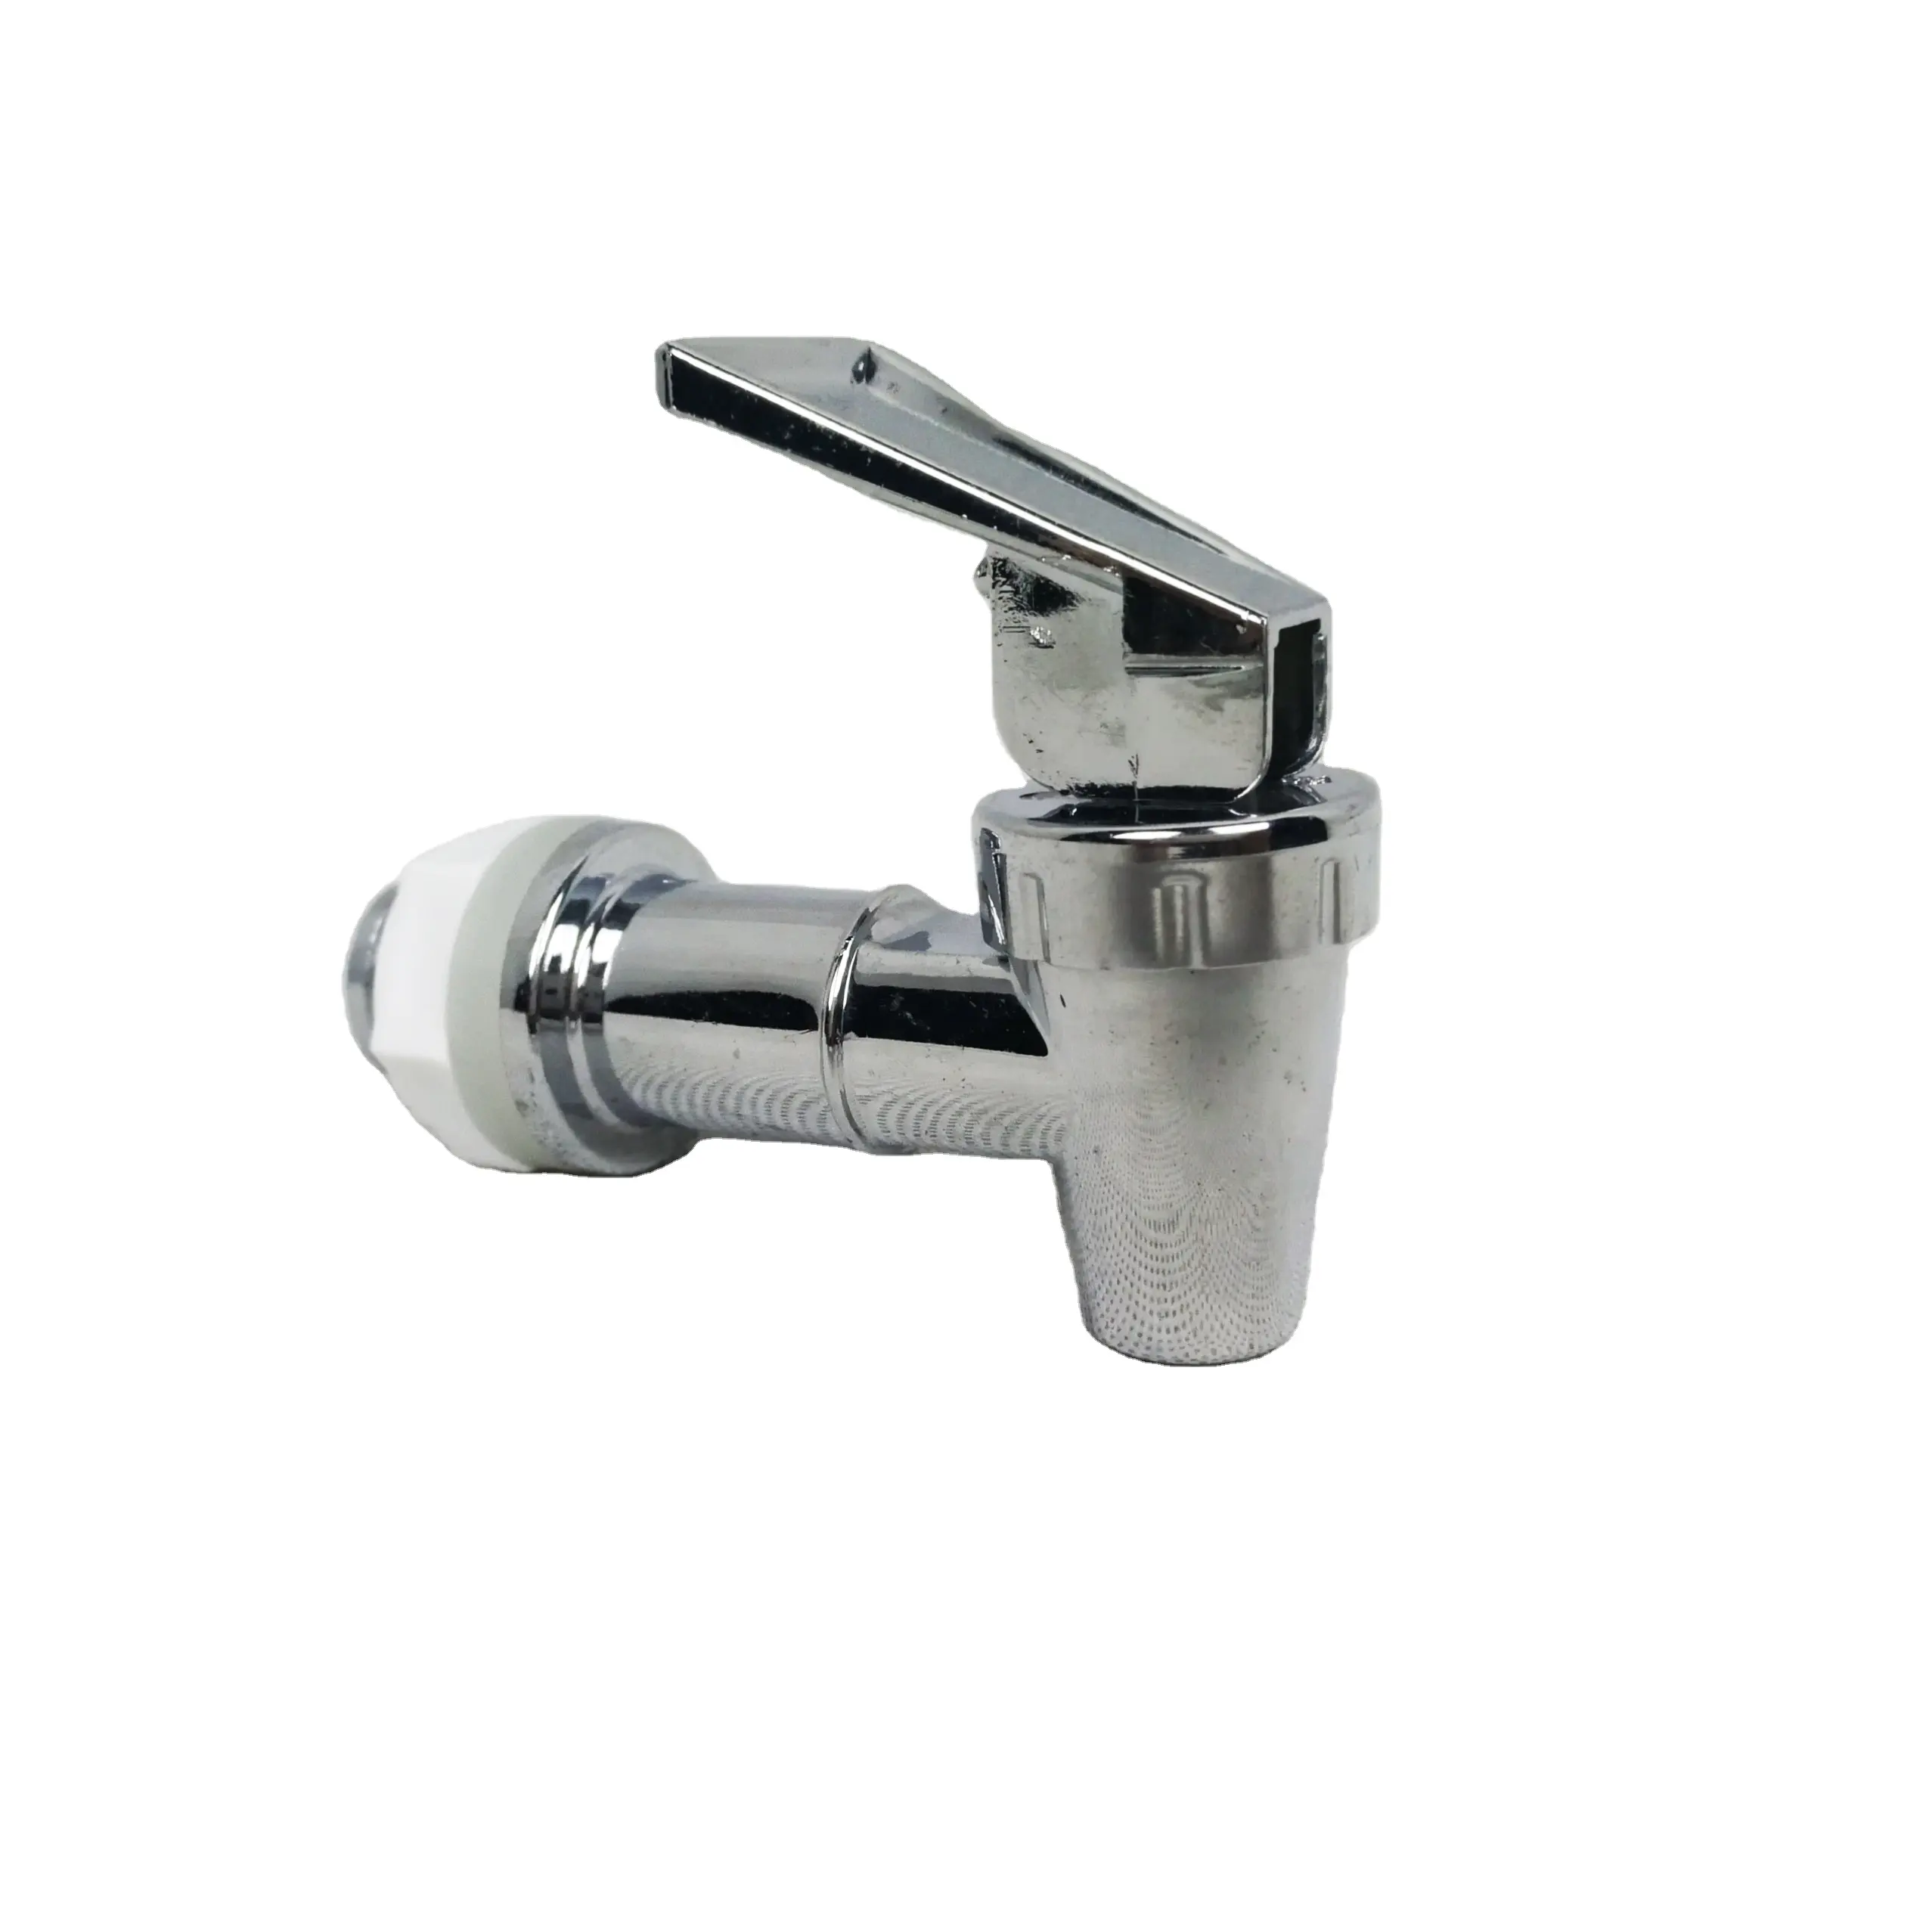 High Quality Replacement Lever Pour Spout for Beverage Dispenser